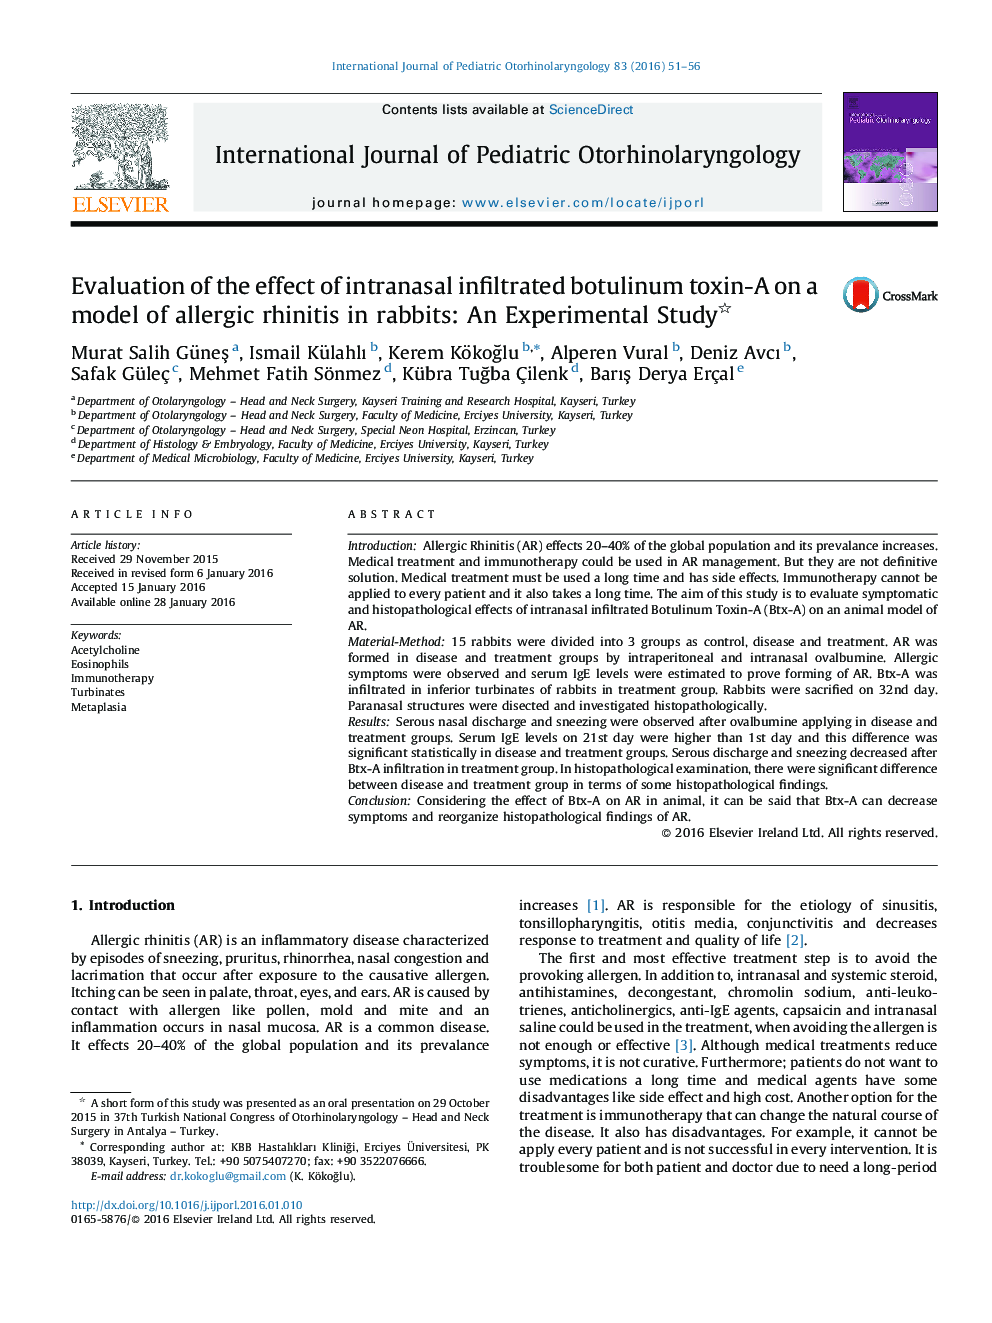 Evaluation of the effect of intranasal infiltrated botulinum toxin-A on a model of allergic rhinitis in rabbits: An Experimental Study